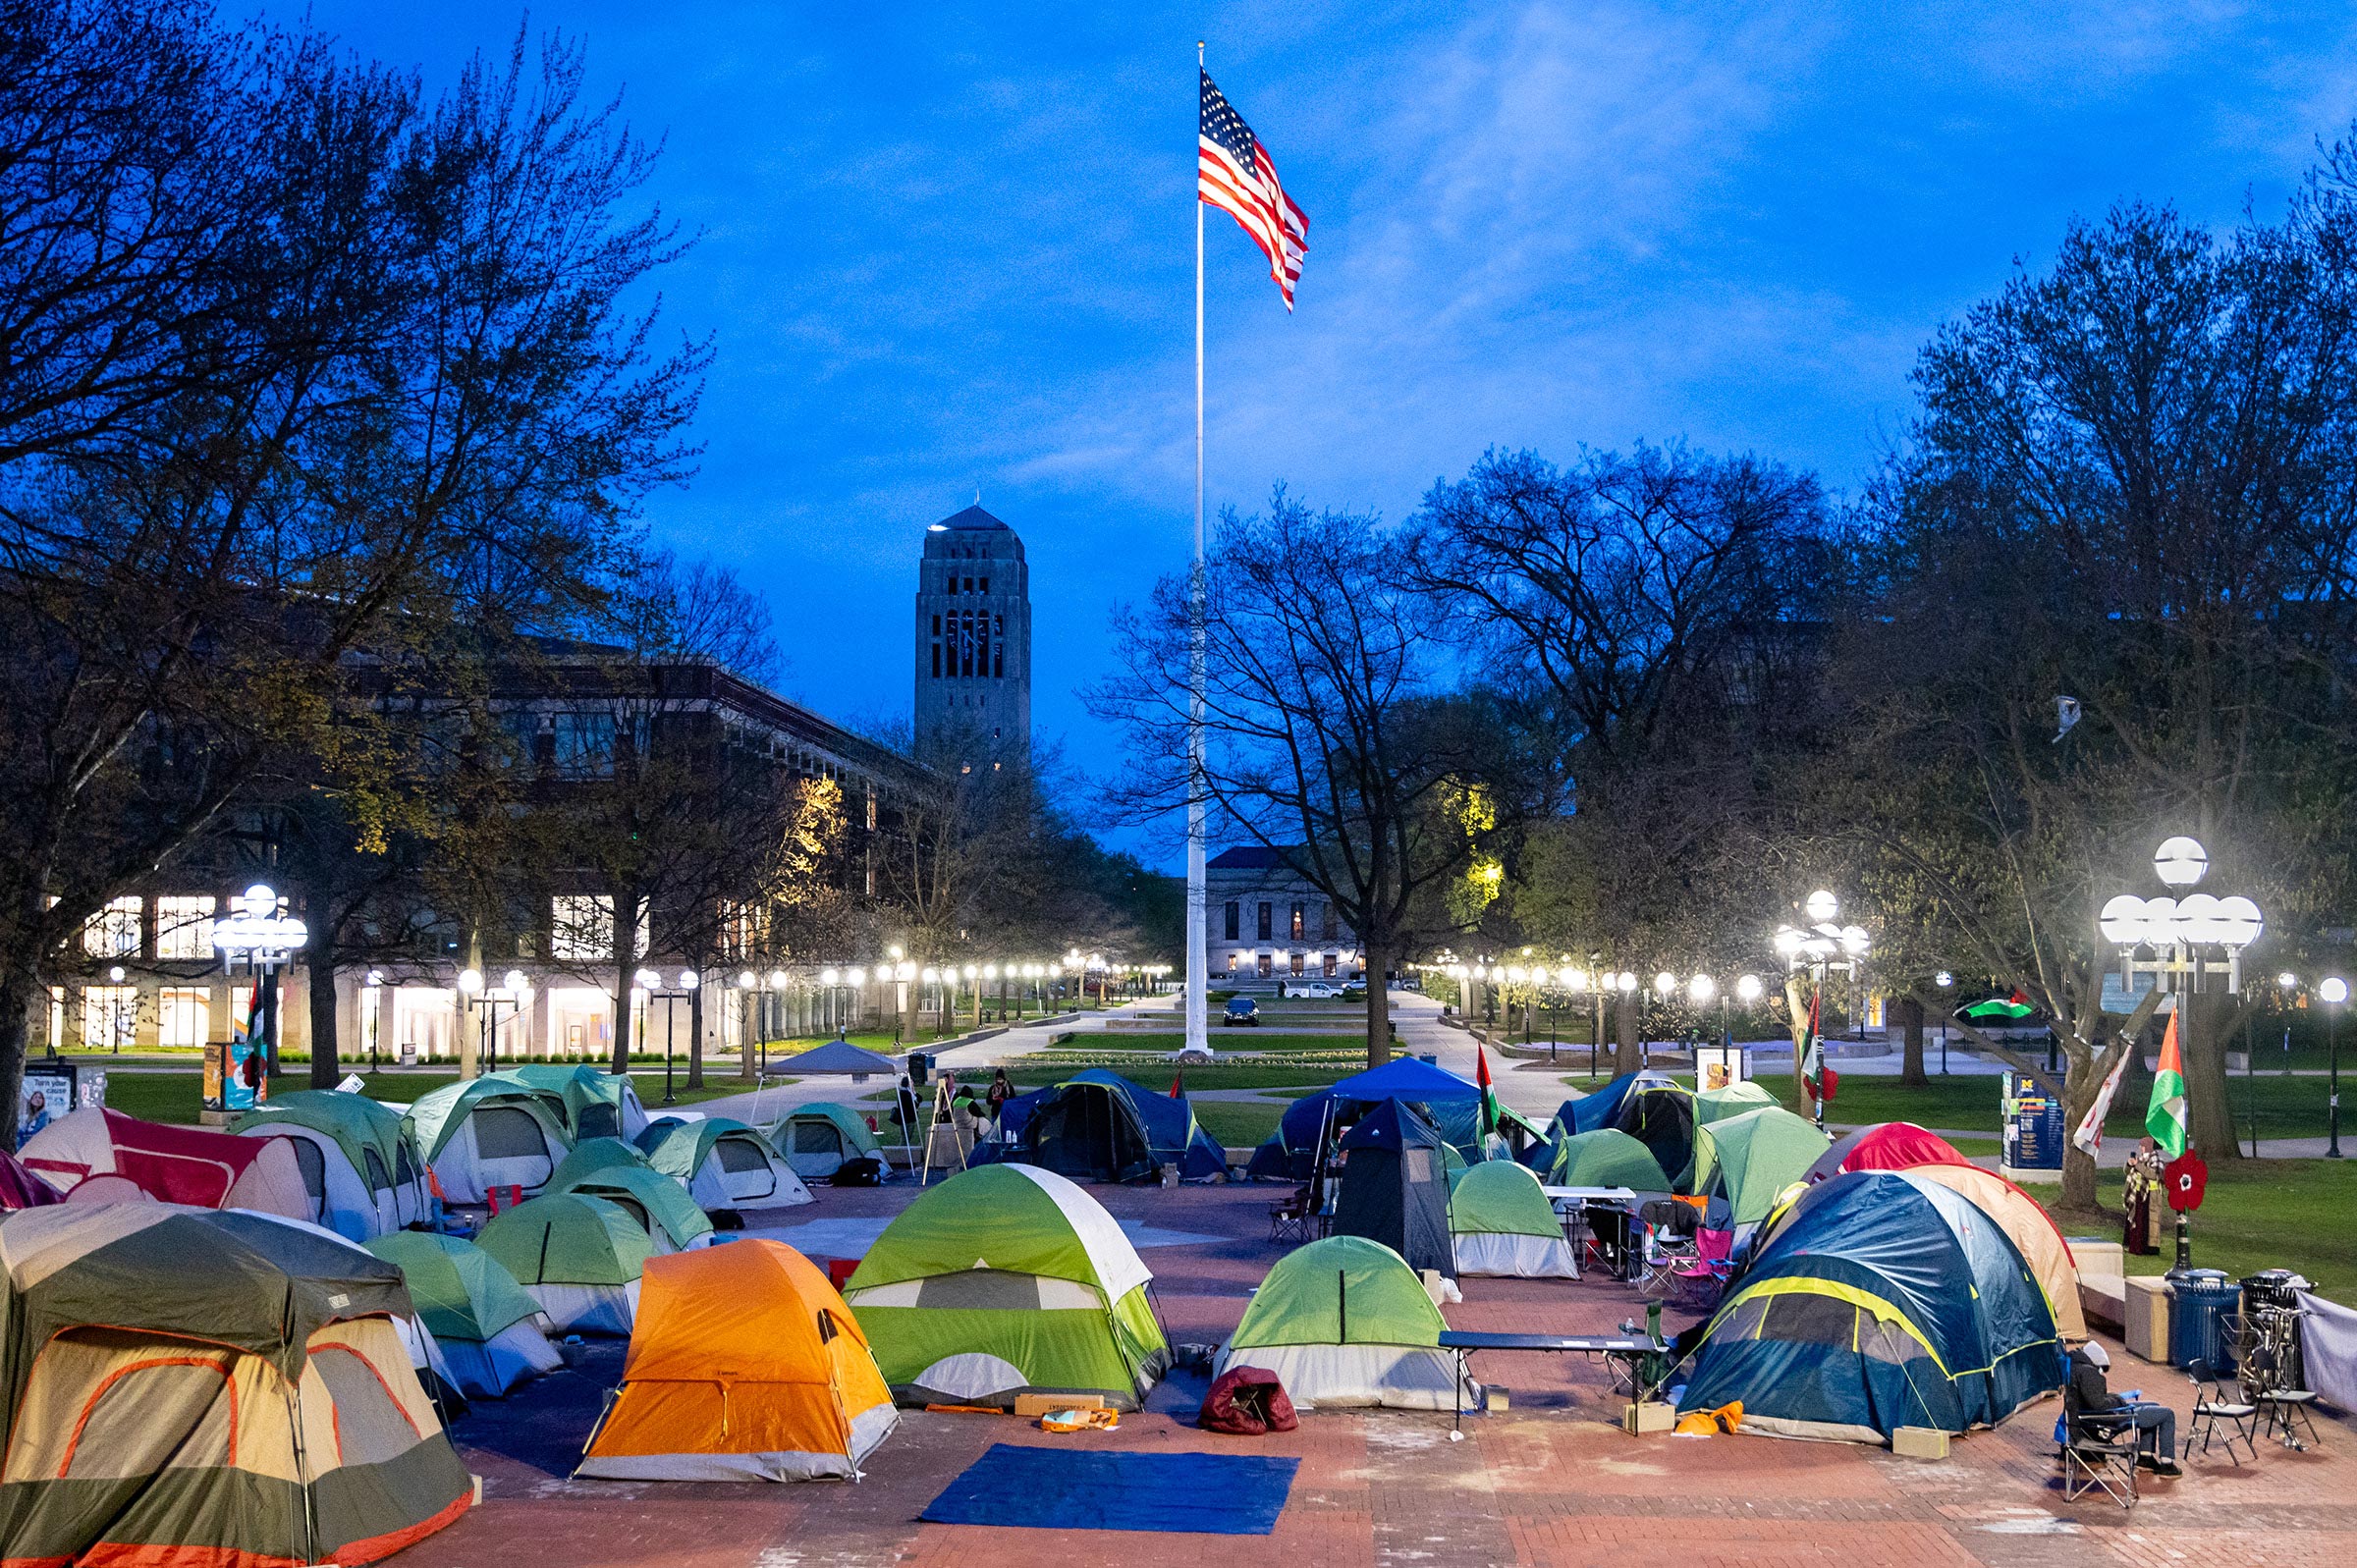 A deep blue sky over several tents set up over the University of Michigan's Central Campus early in the morning on April 23.